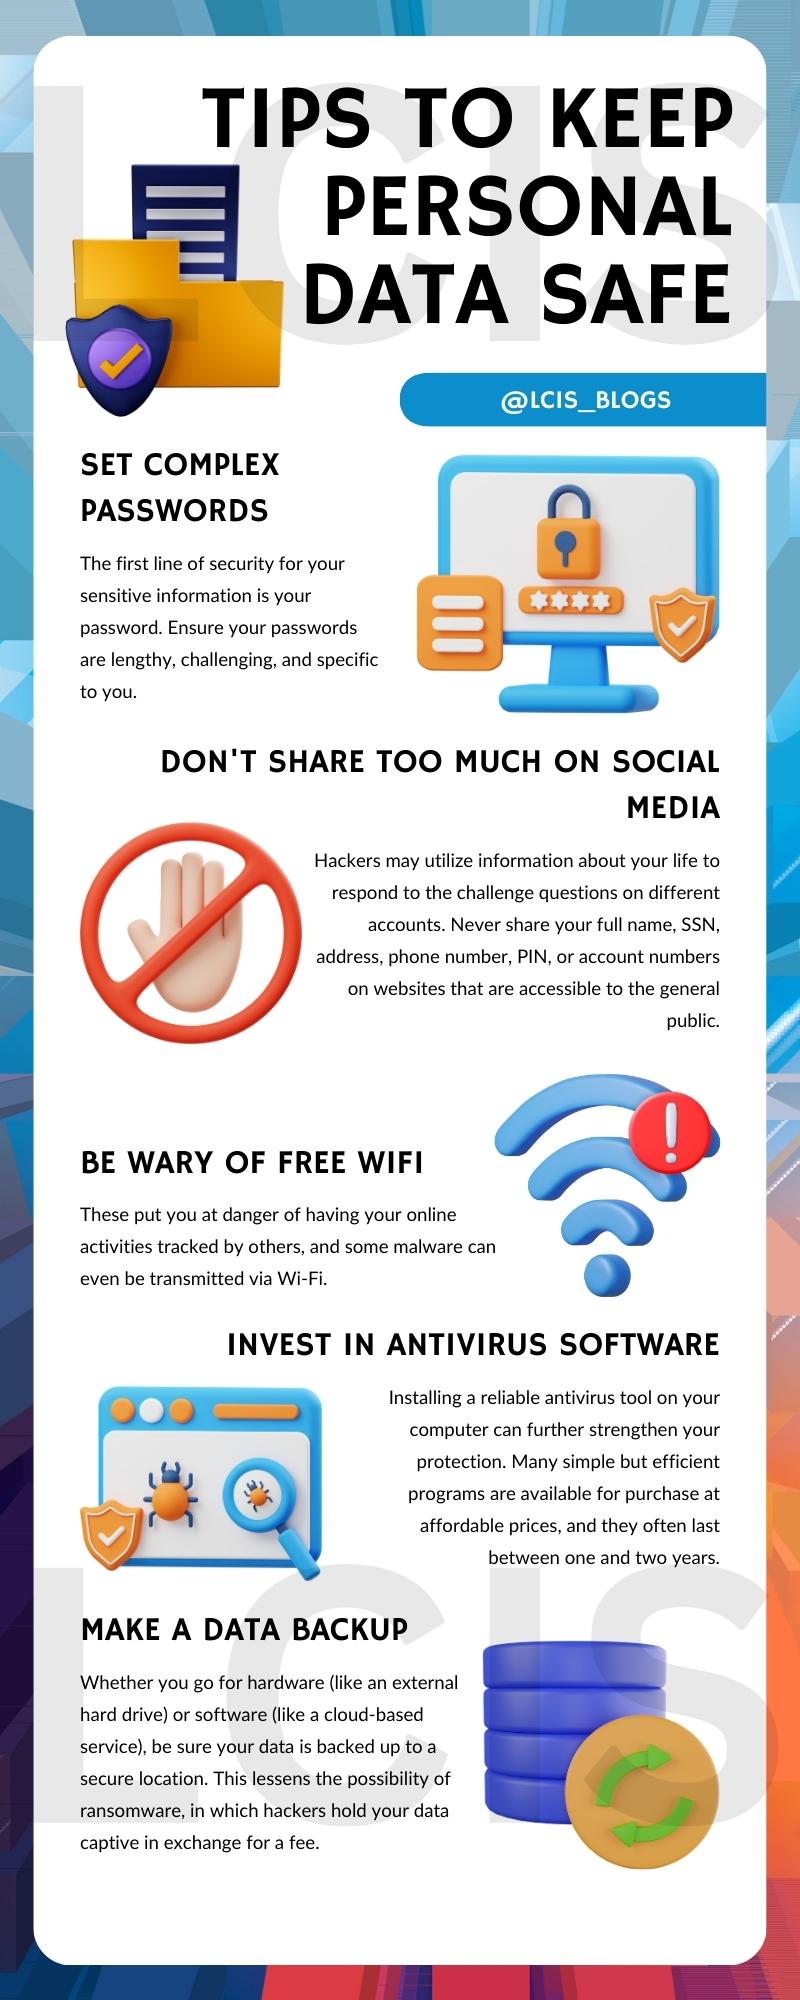 Tips to Keep Personal Data Safe